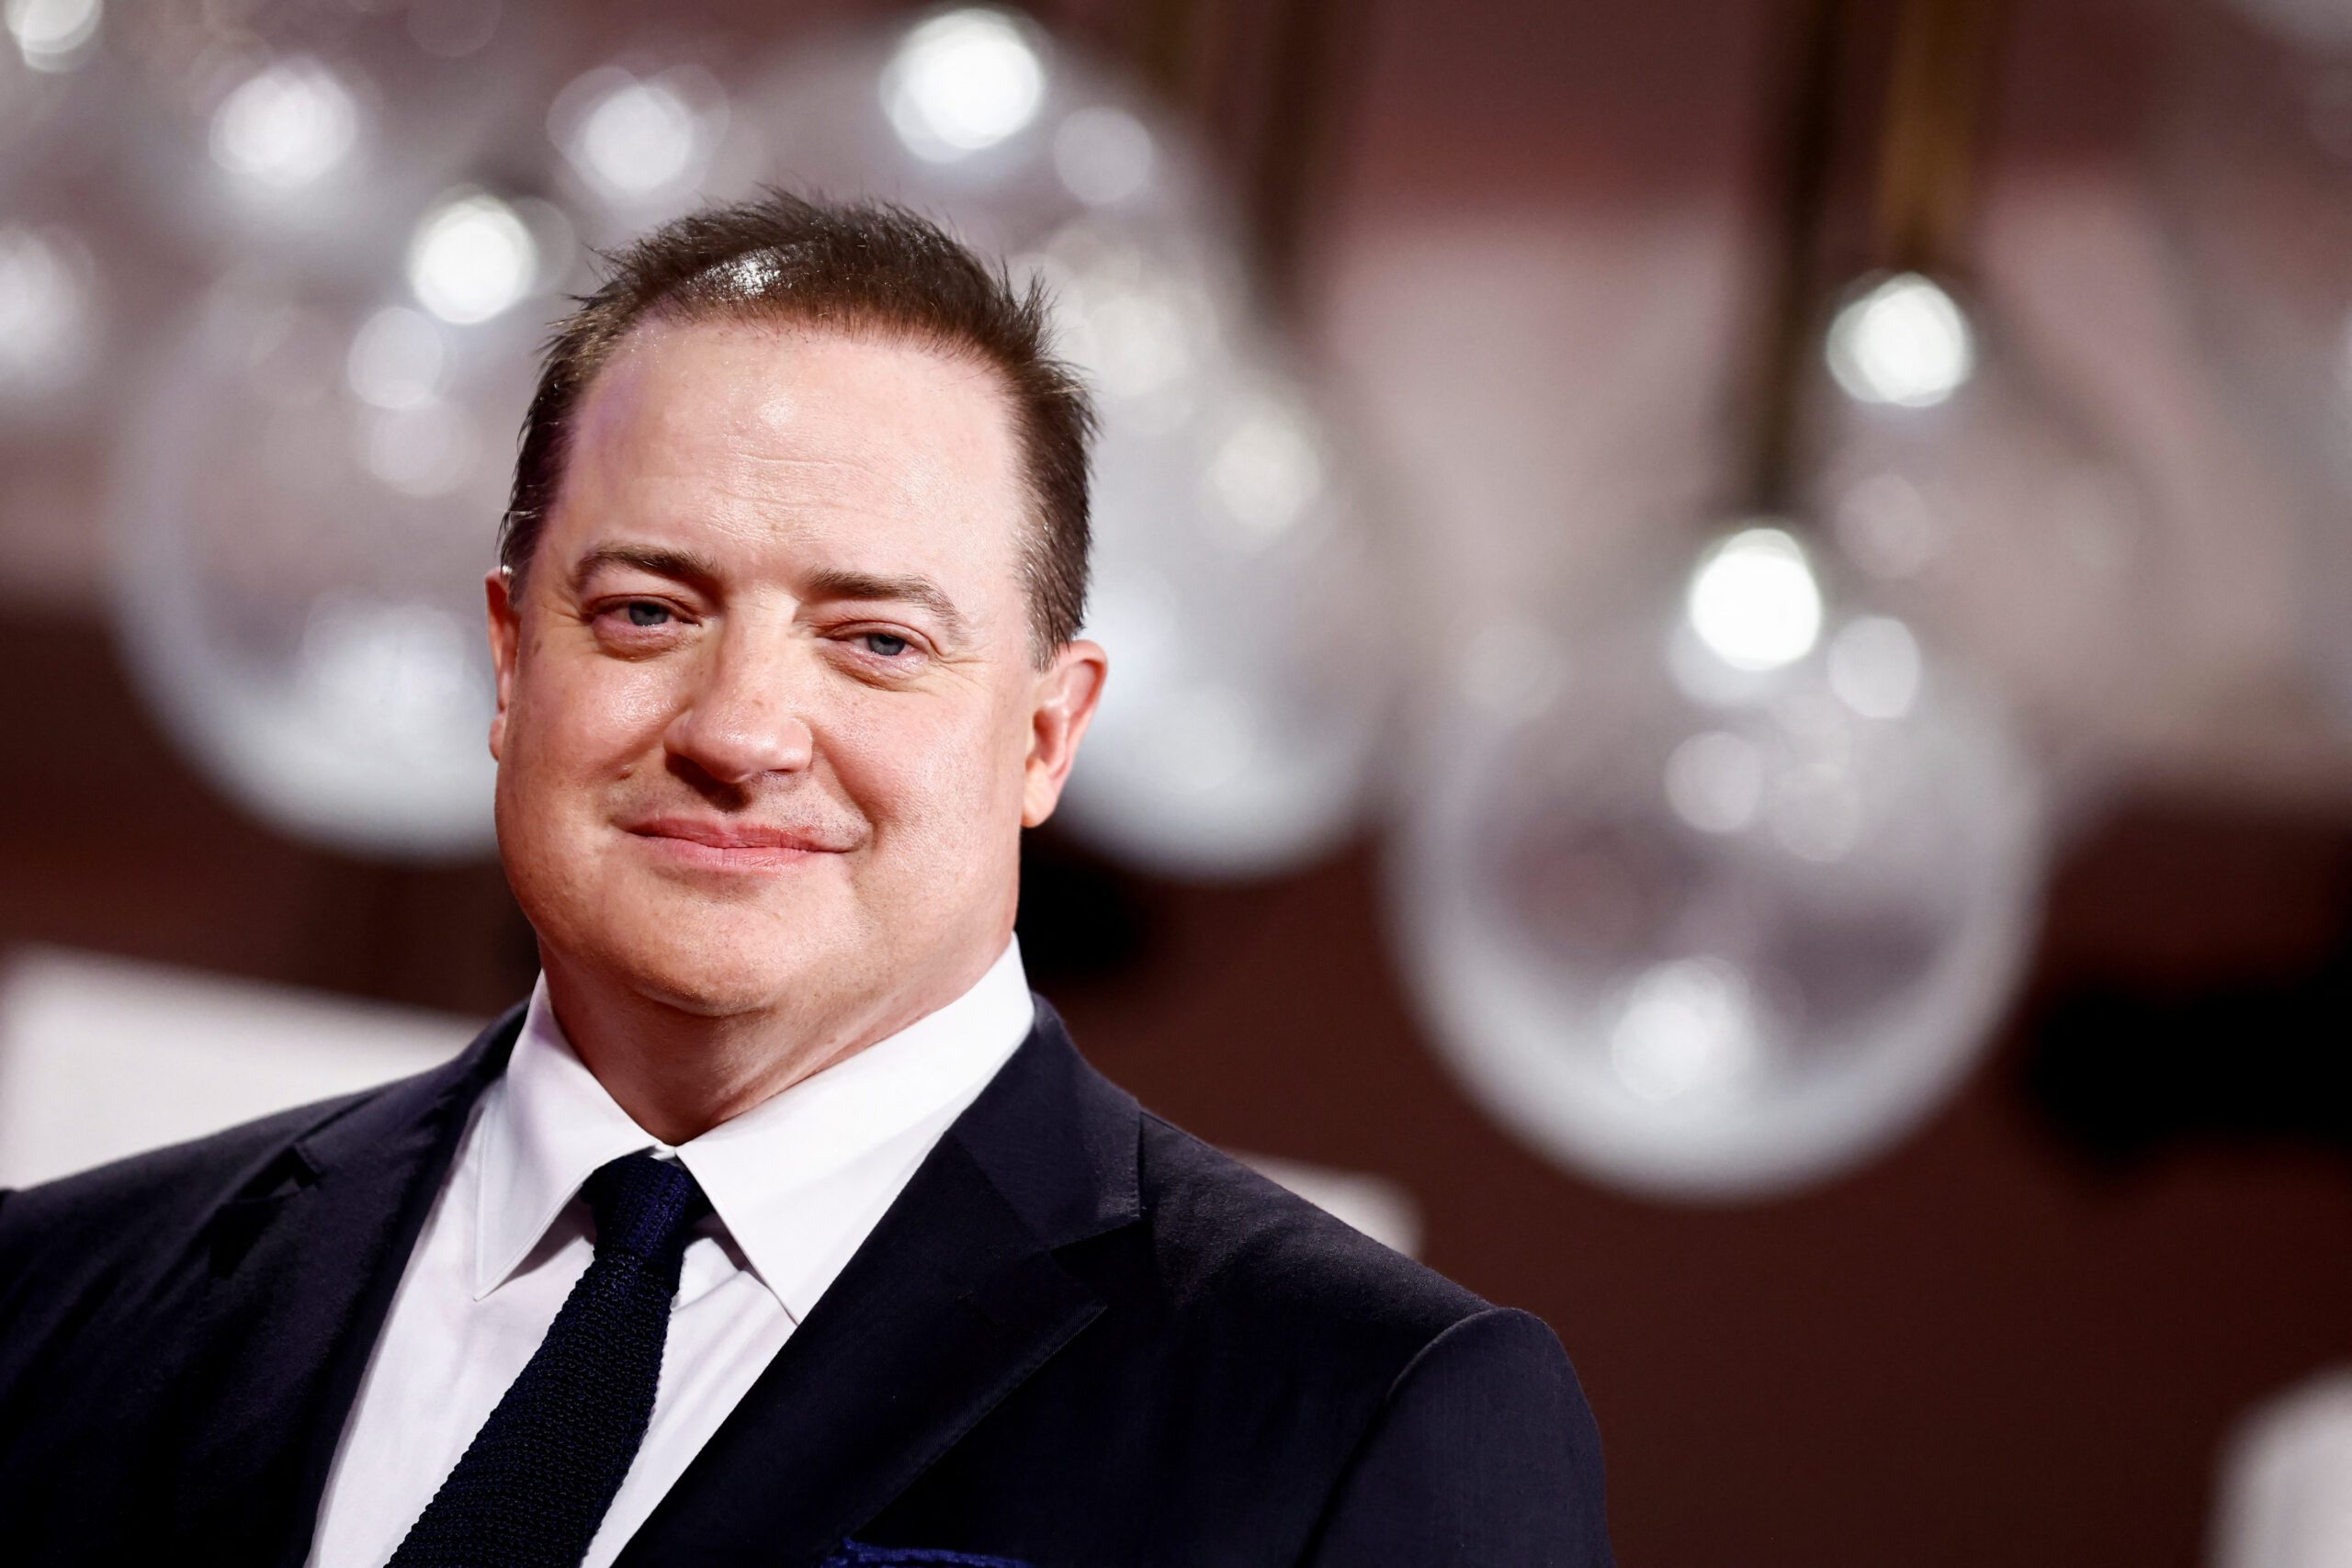 Brendan Fraser learns new way to move in Venice drama ‘The Whale’